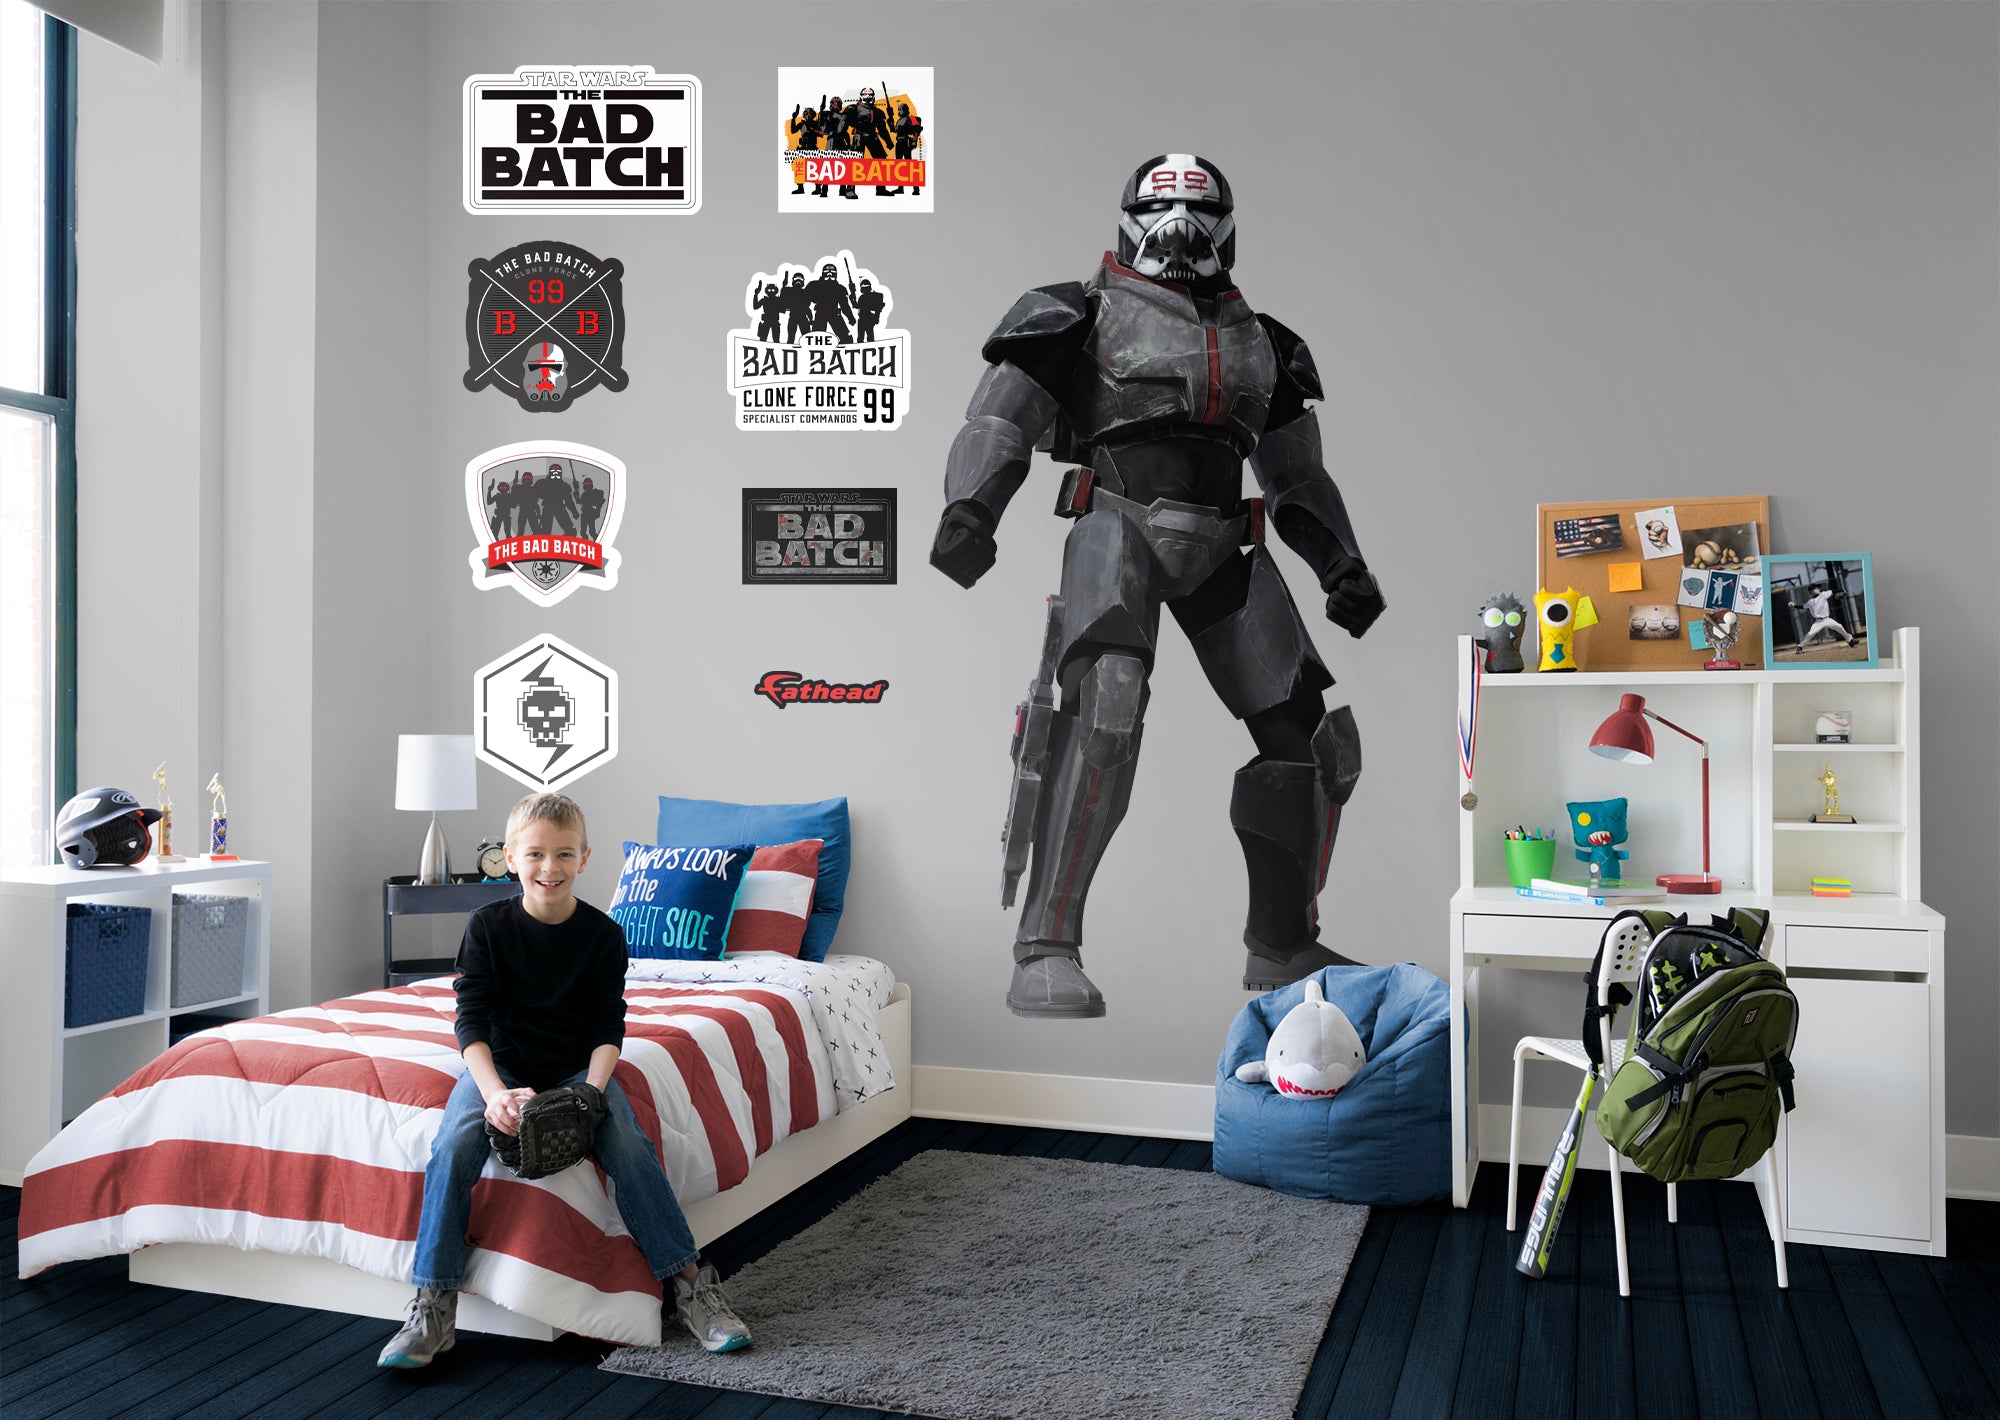 Bad Batch Wrecker - Officially Licensed Star Wars Removable Wall Decal Life-Size Character + 8 Decals by Fathead | Vinyl